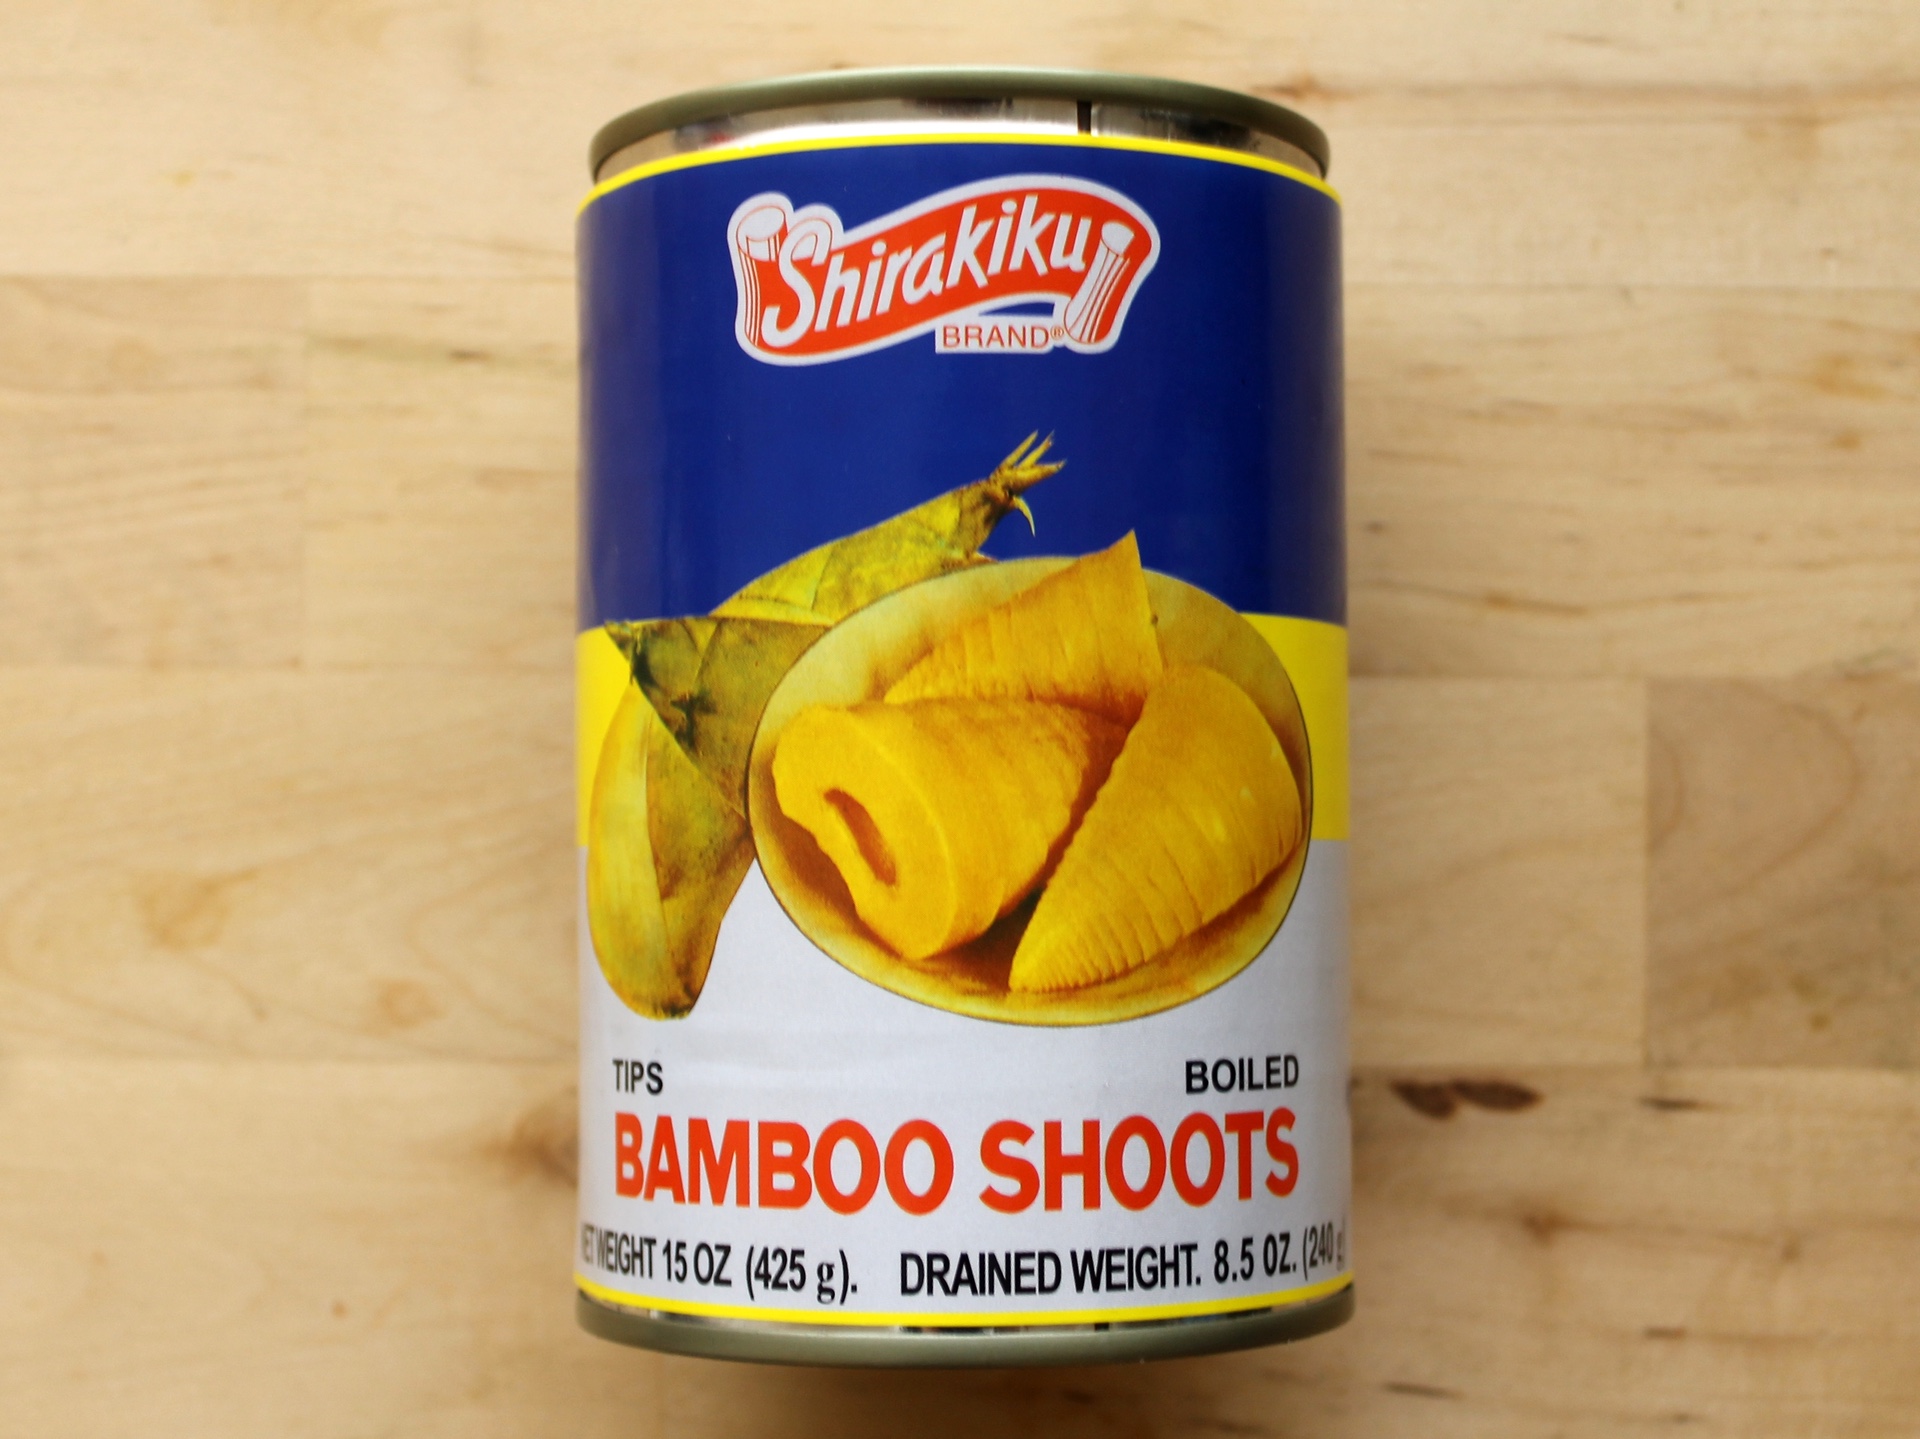 Bamboo shoots are most often found canned in water. You can buy tips and slice them yourself, or you can buy the bamboo pre-sliced.